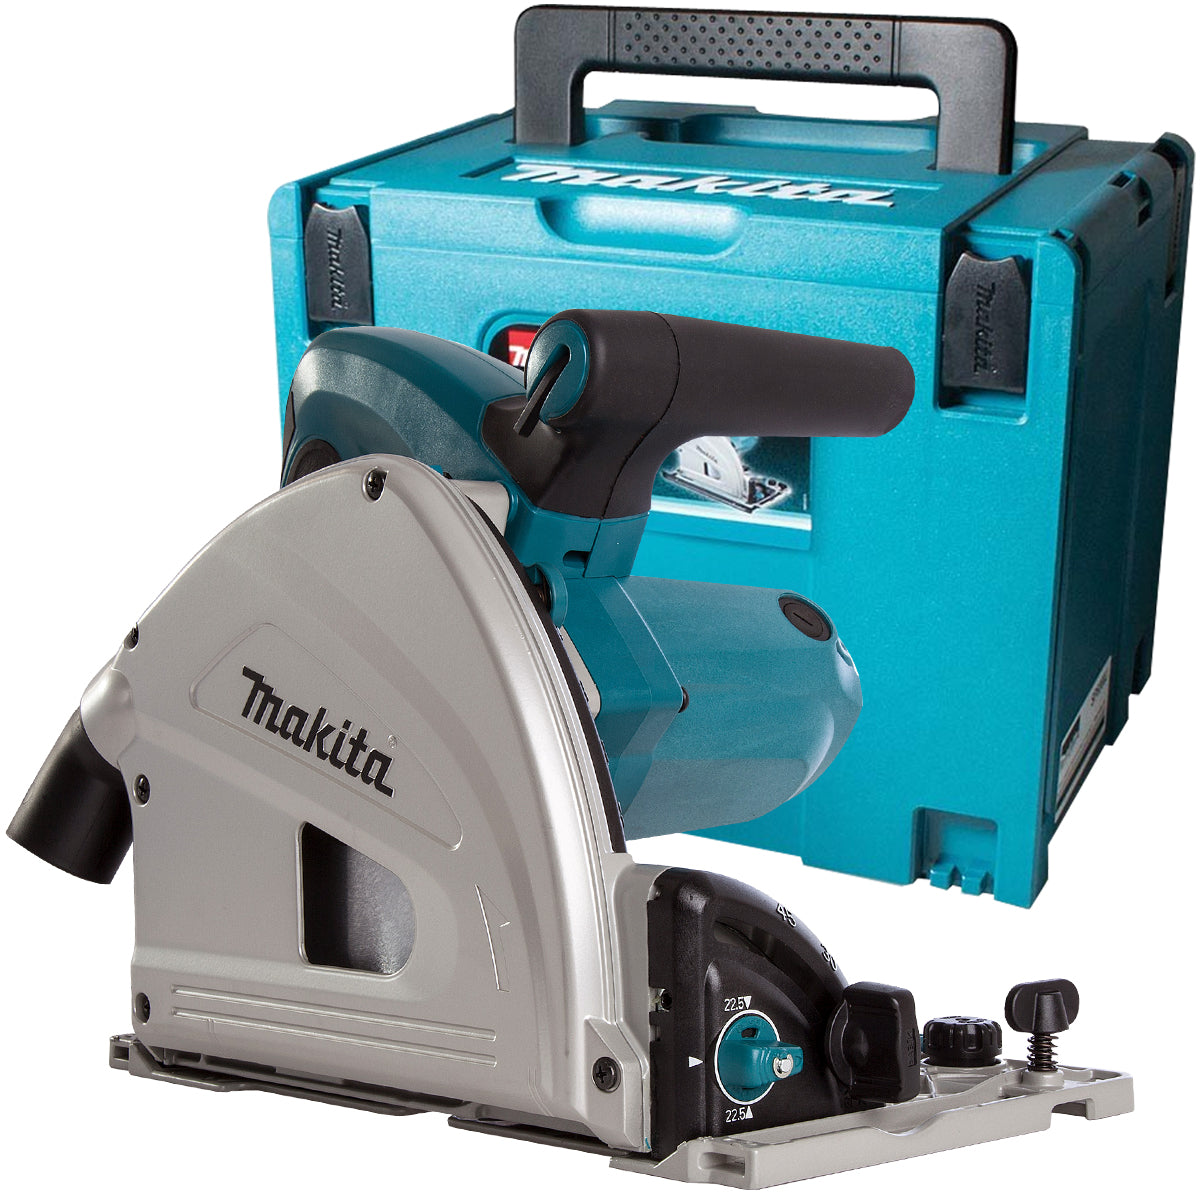 Makita SP6000J2 240V 165mm Plunge Saw in Case with 2 x Guide Rail Connector Bar & Clamp